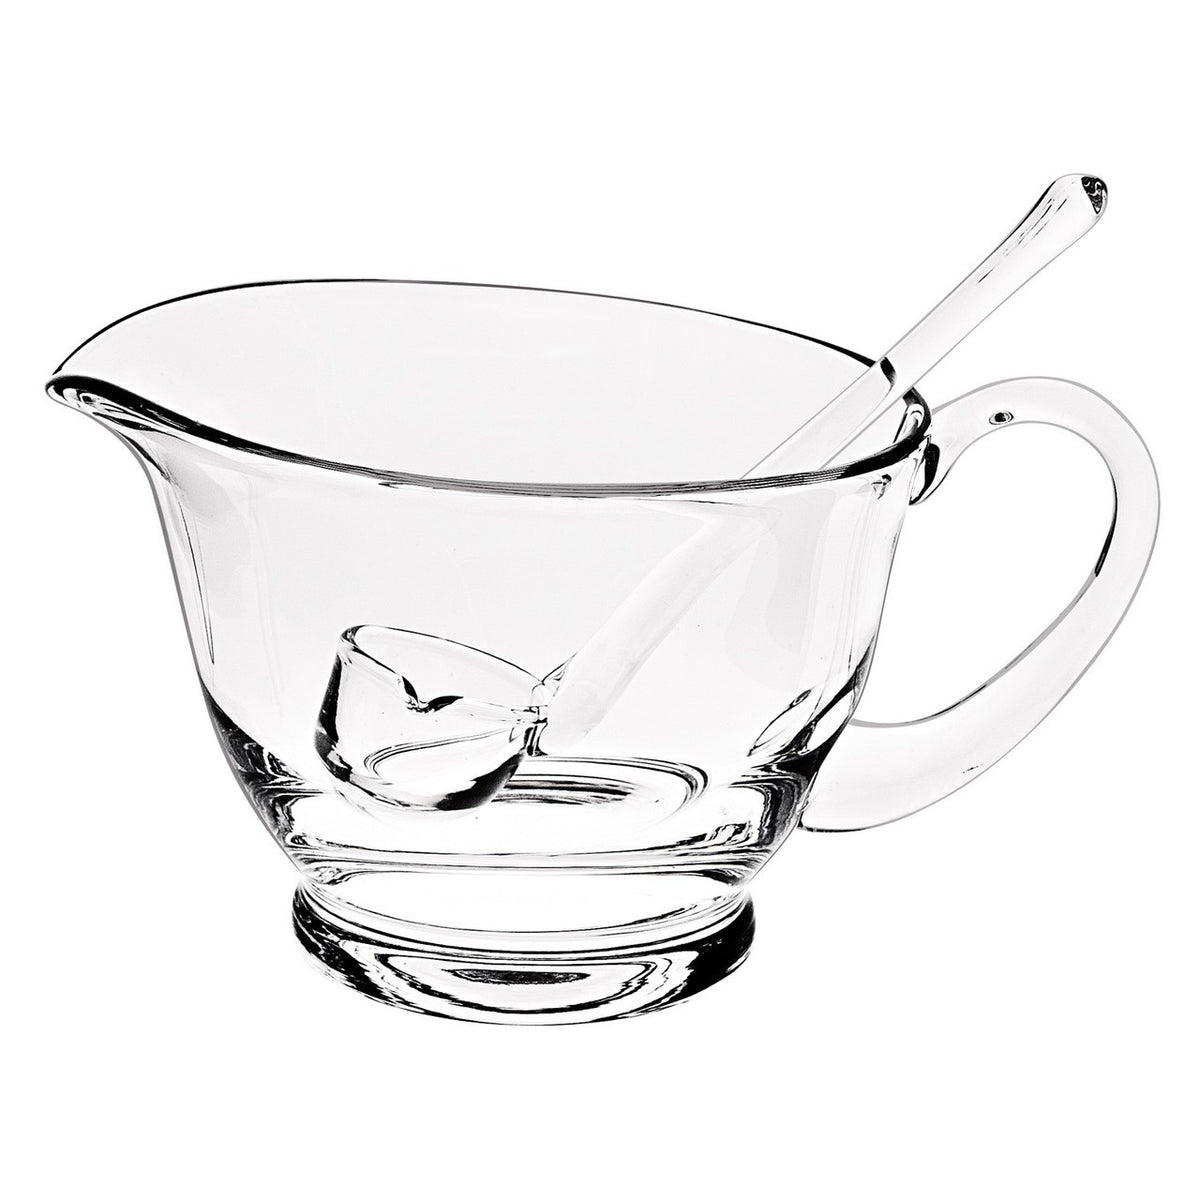 Holiday Gravy Sauce Boat with Ladle L6 x h5 inches